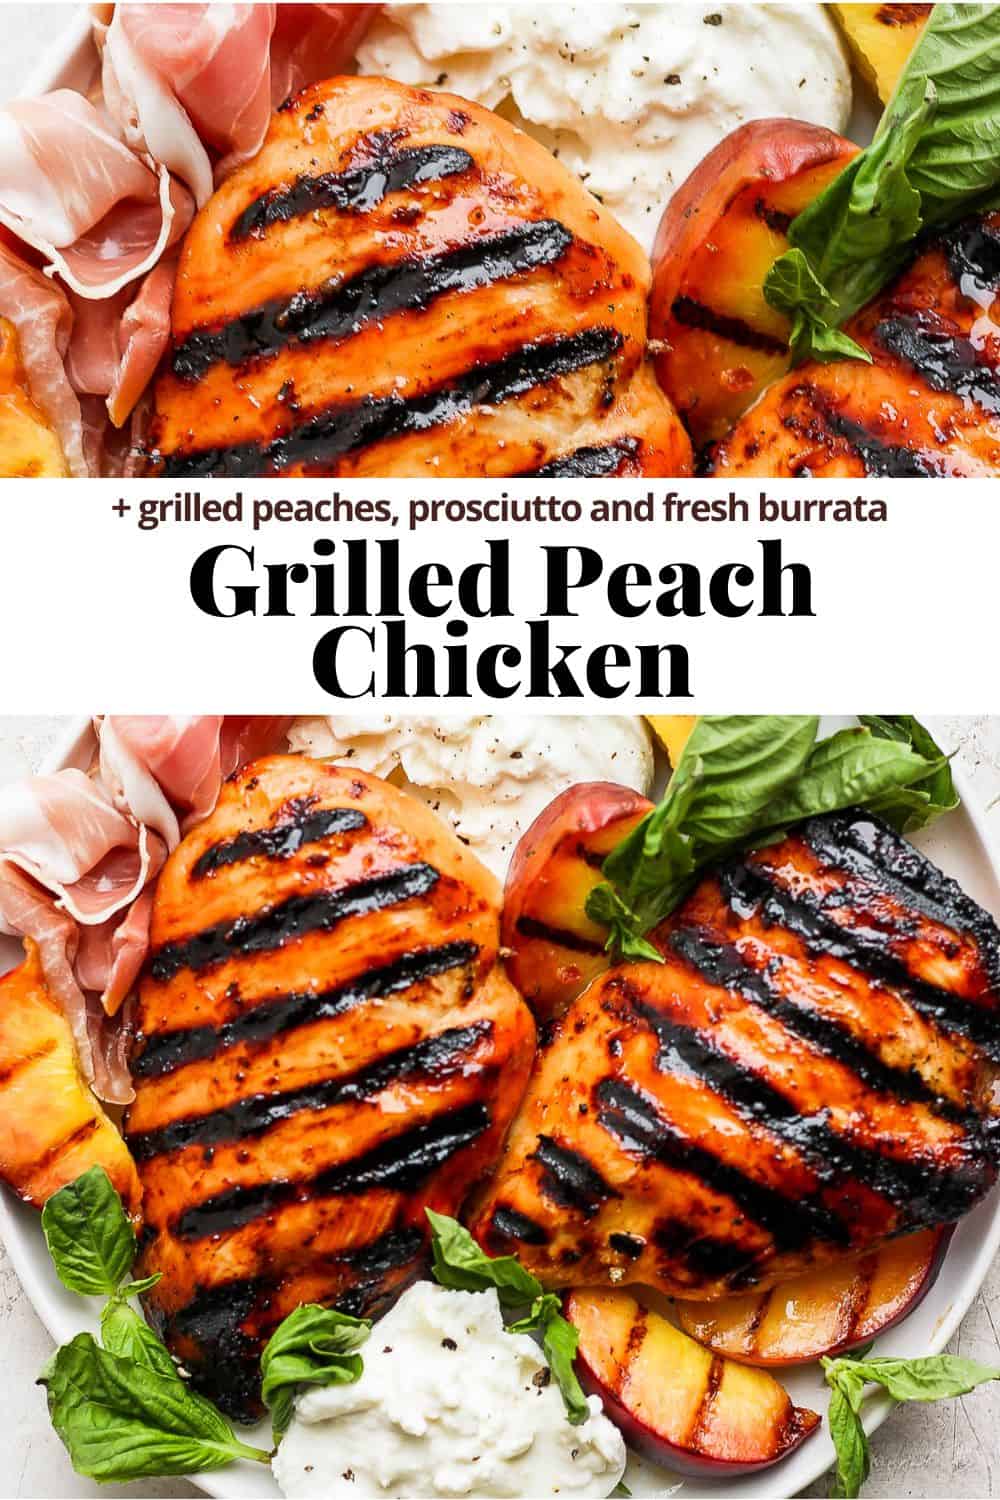 Pinterest image showing the peach chicken on a plate with the title "grilled peach chicken + grilled peaches, prosciutto and fresh burrata".